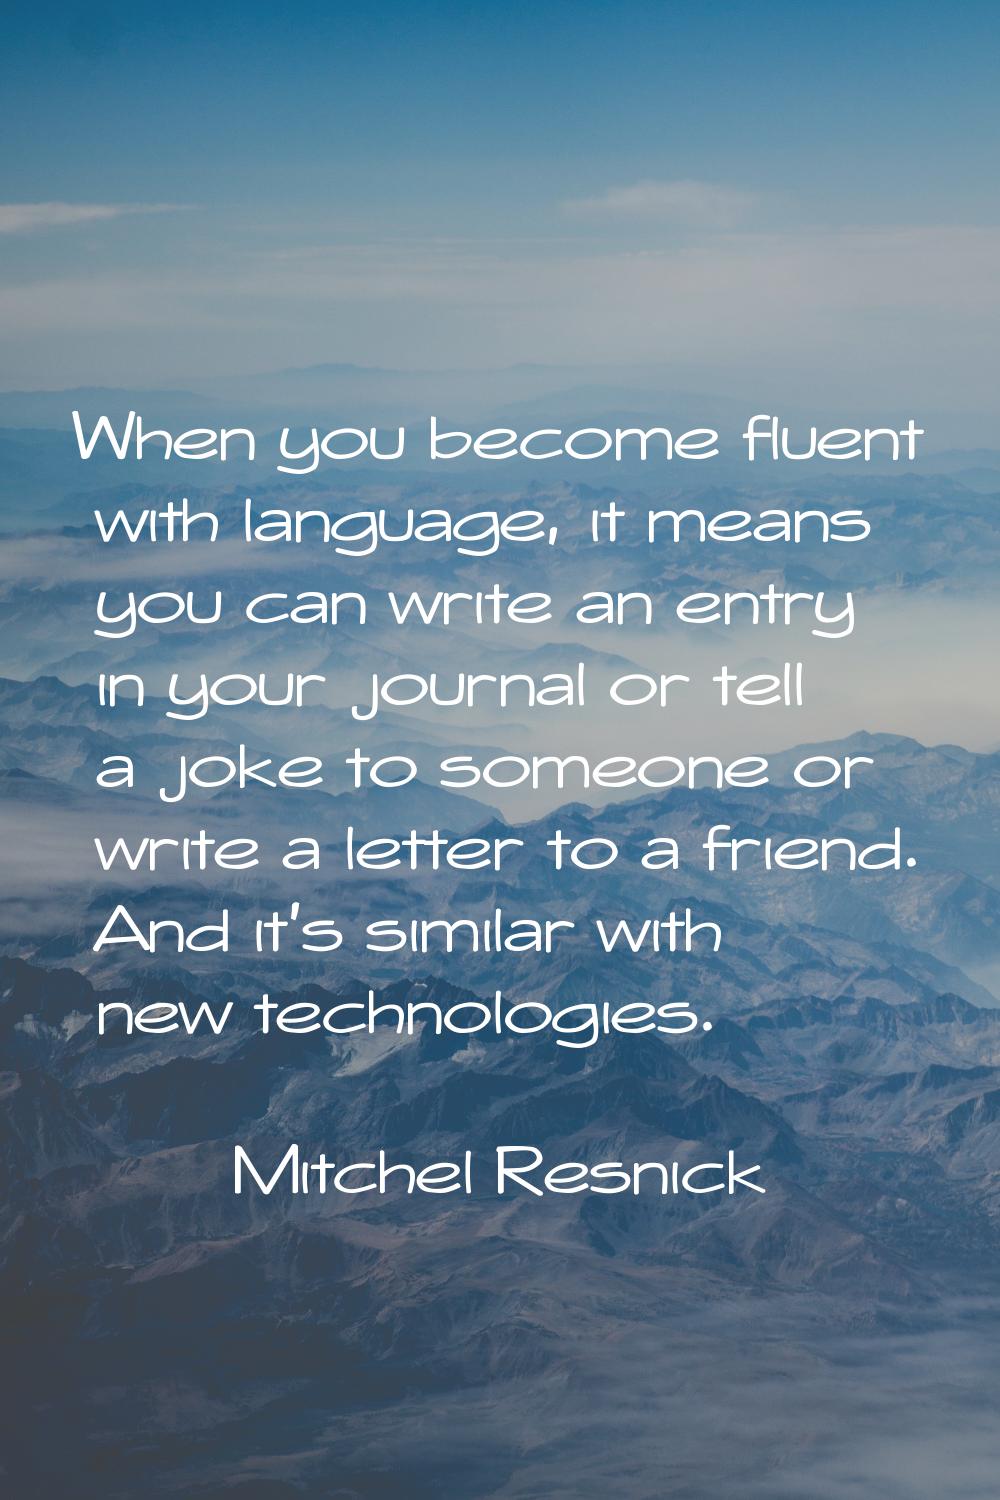 When you become fluent with language, it means you can write an entry in your journal or tell a jok